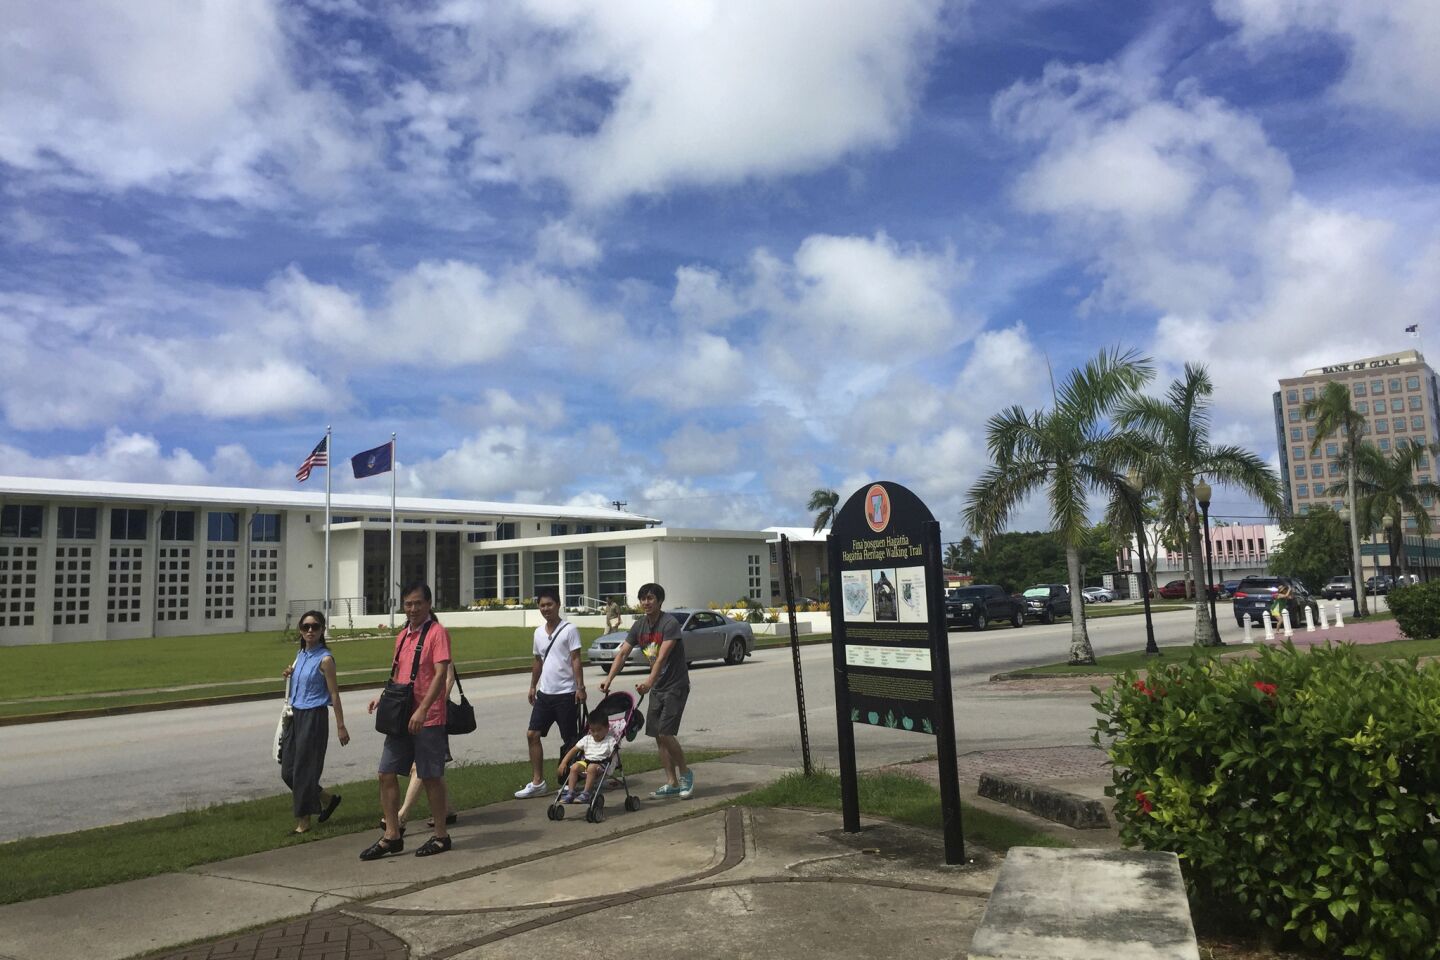 People walk around Hagatna, the capital of Guam, on Wednesday, Aug. 9, 2017. Despite government assurances, residents of the U.S. territory say they're afraid after being caught in the middle of rising tensions between President Trump and North Korea.